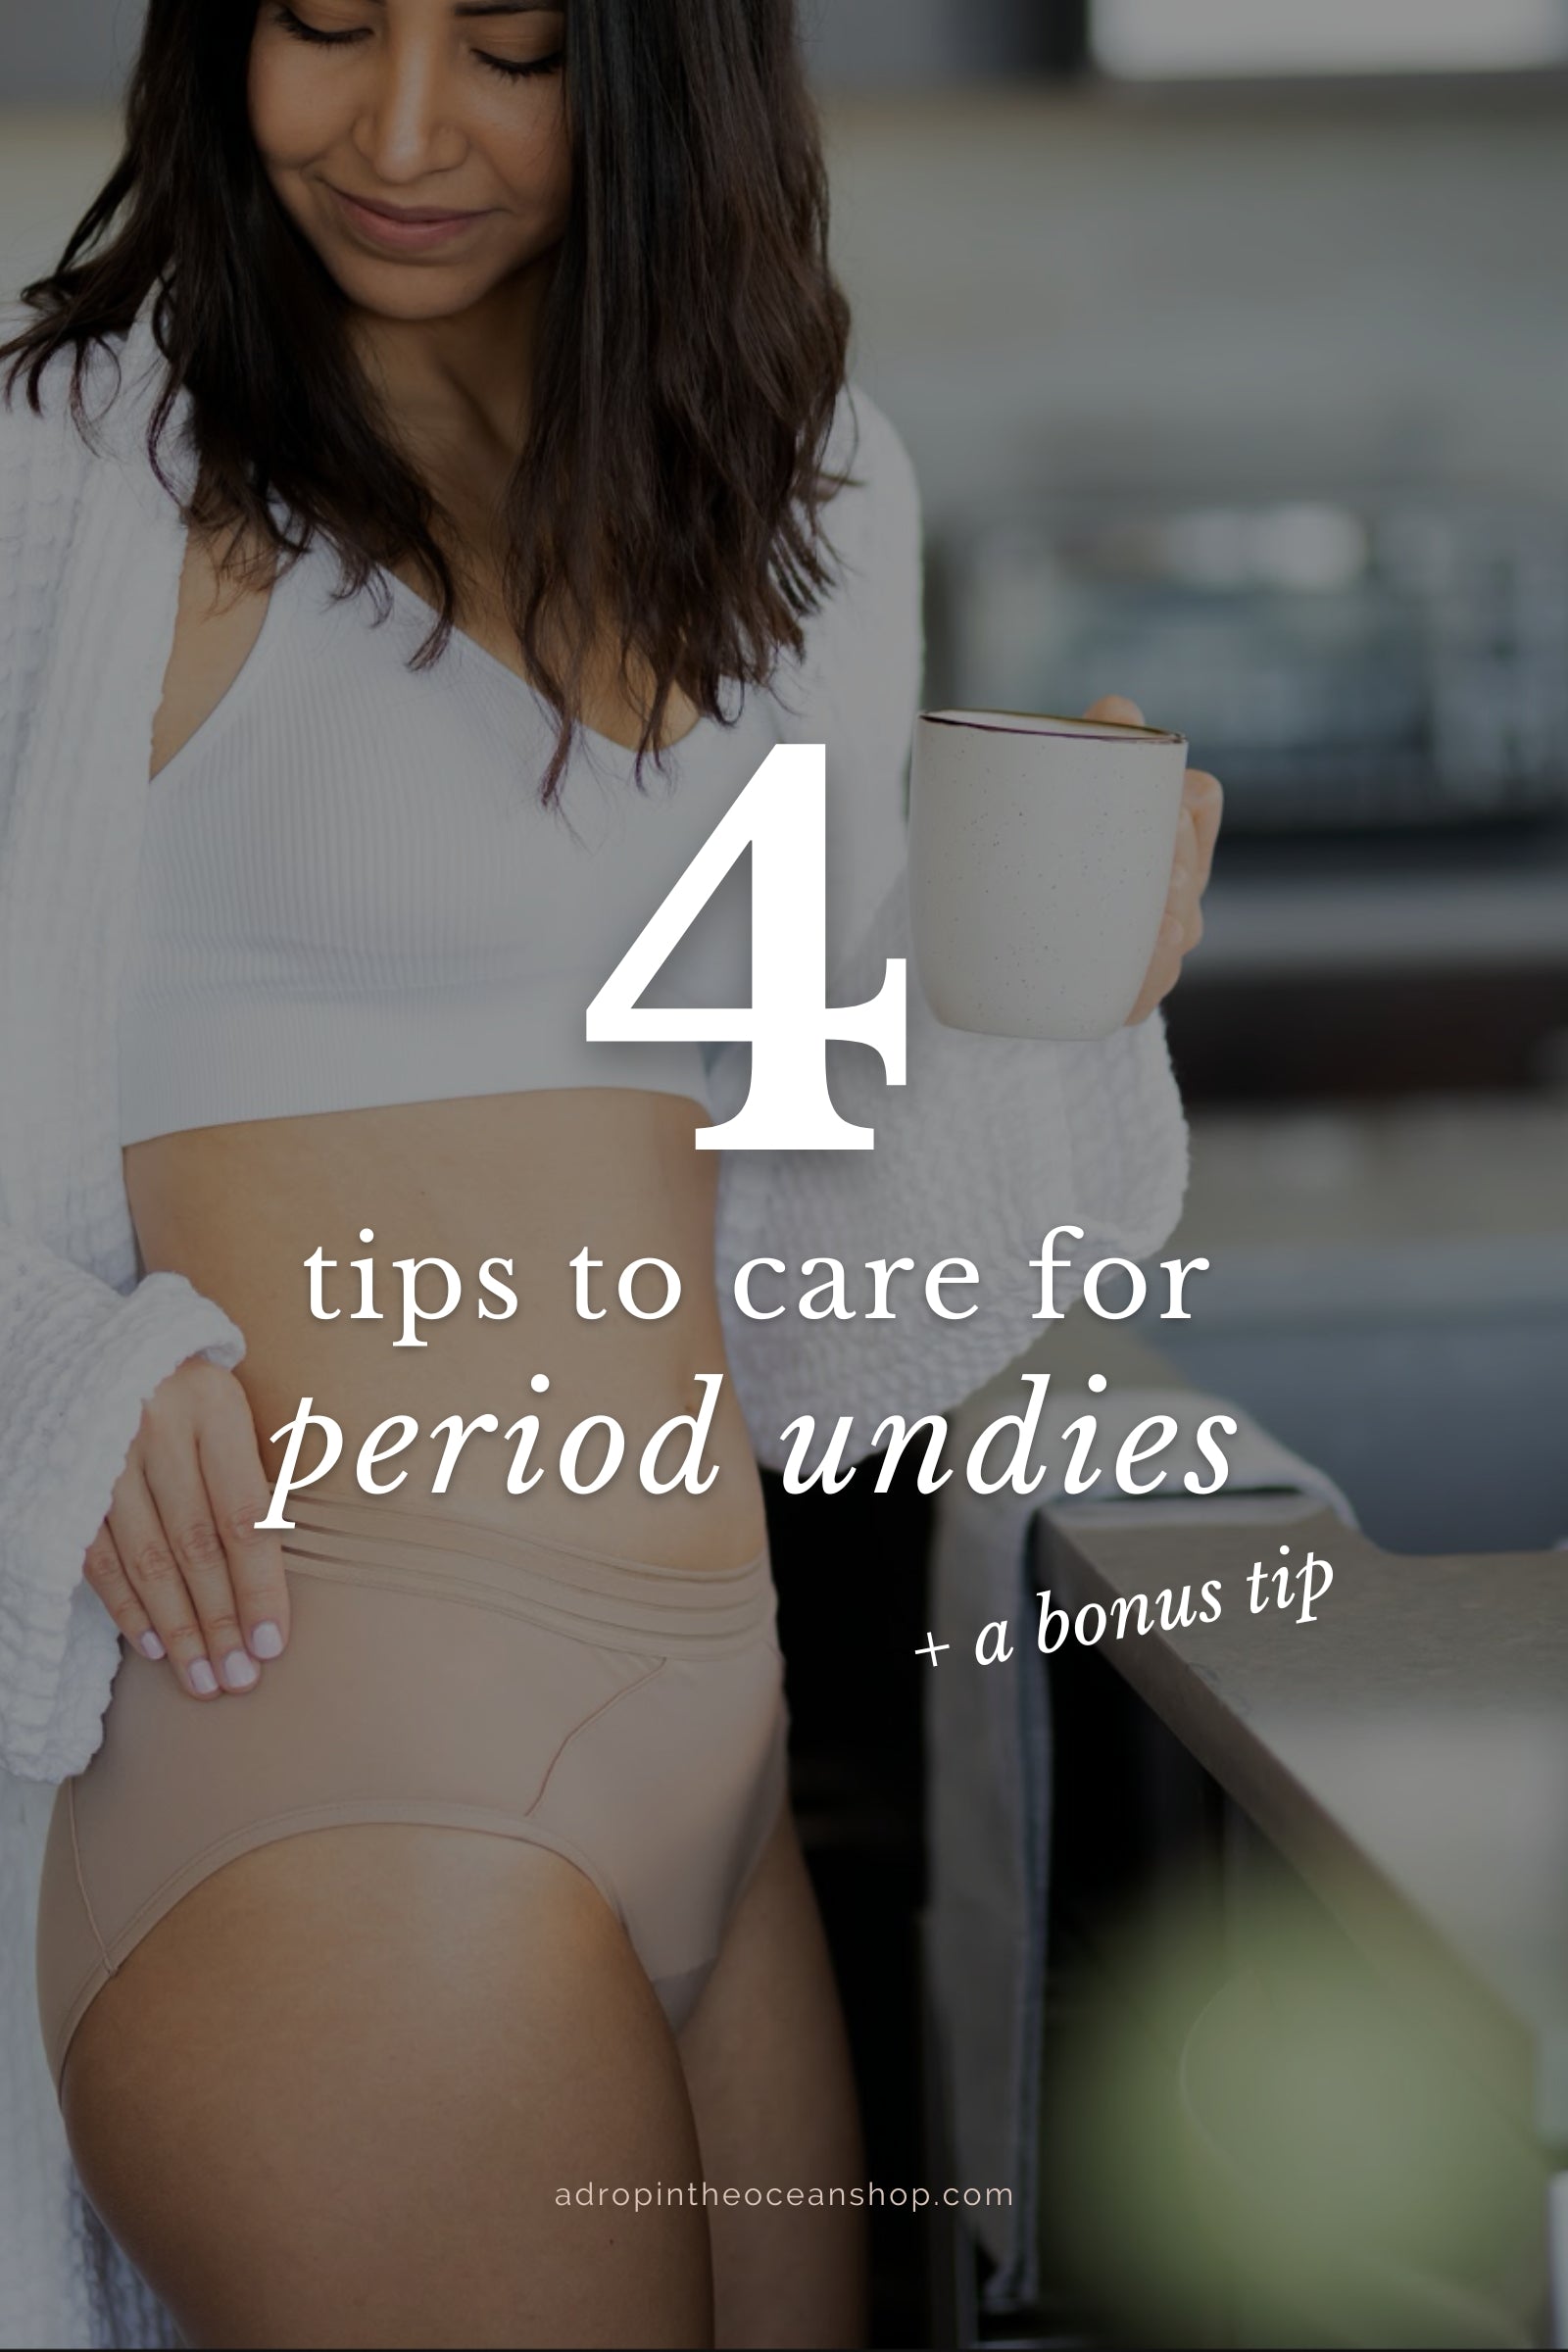 A Drop in the Ocean Shop: How to care for reusable period underwear